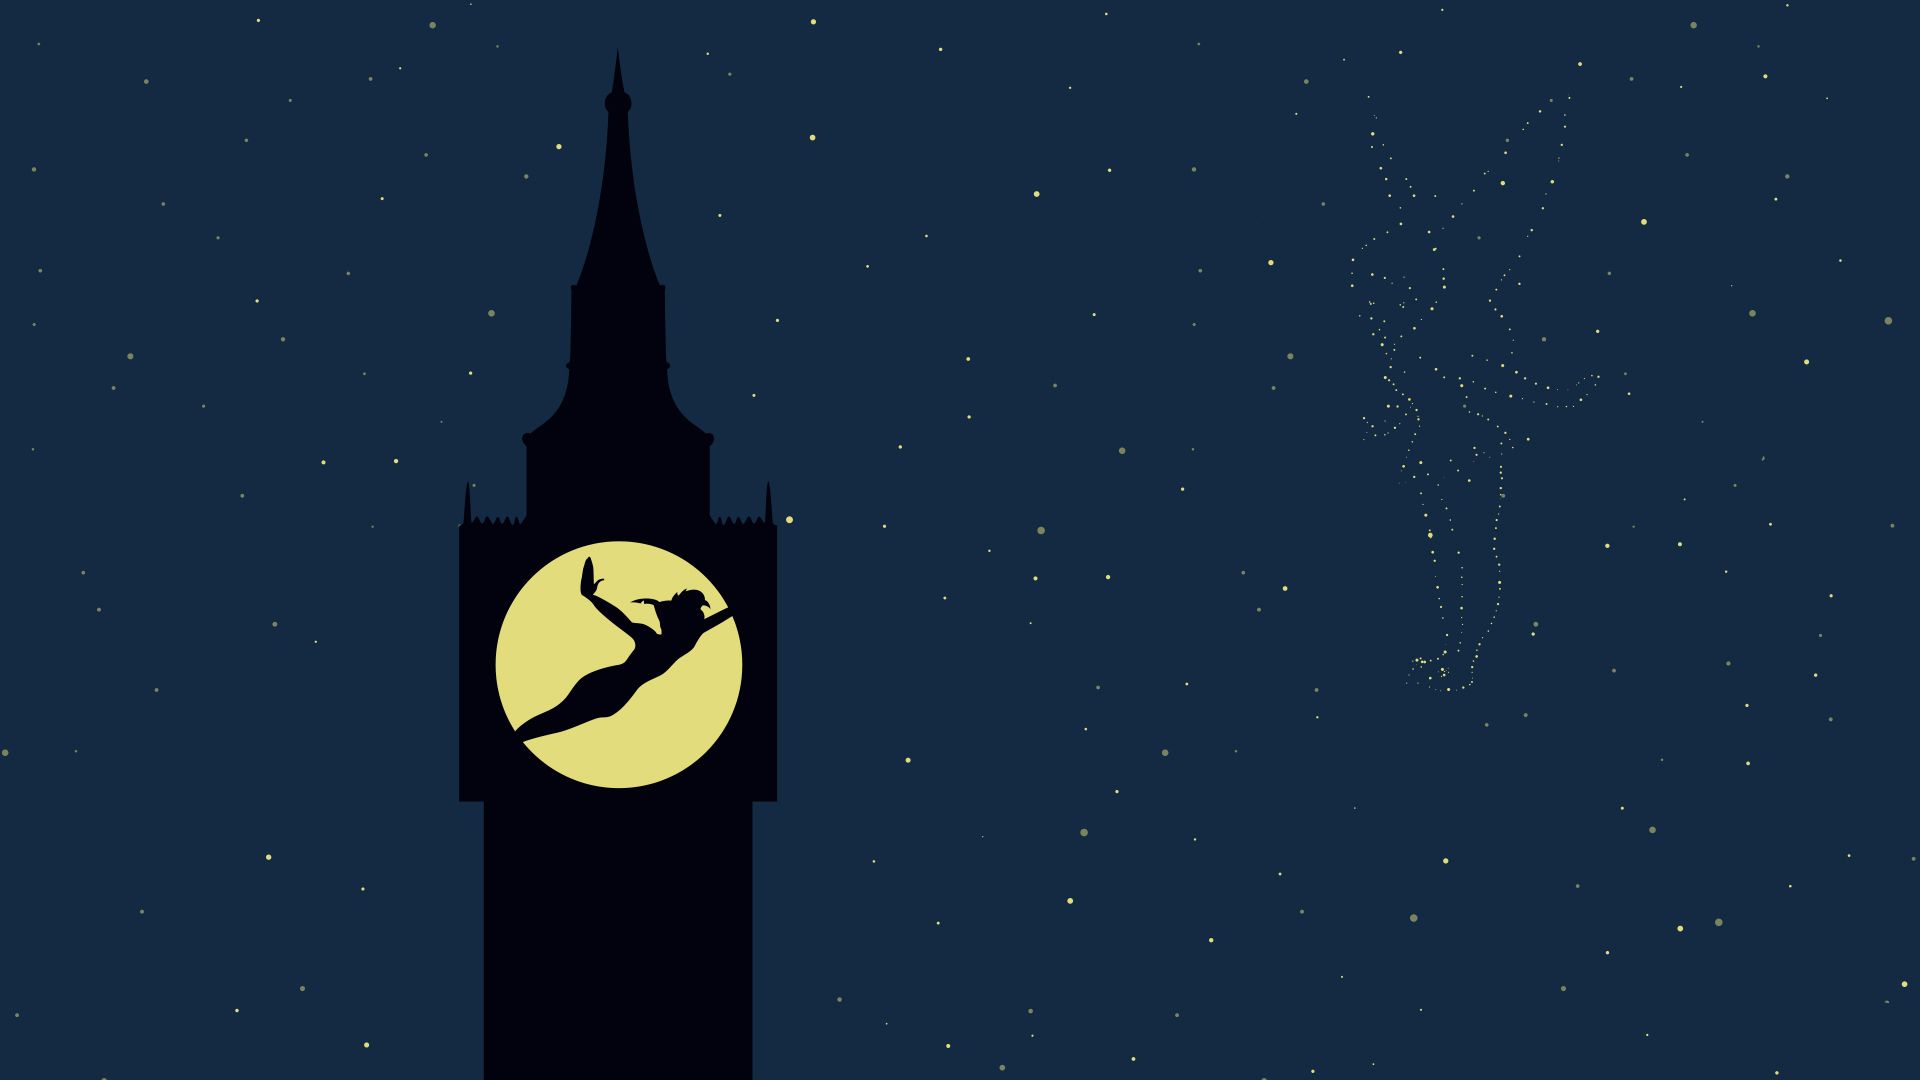 A clock tower with the moon in front of it - Peter Pan